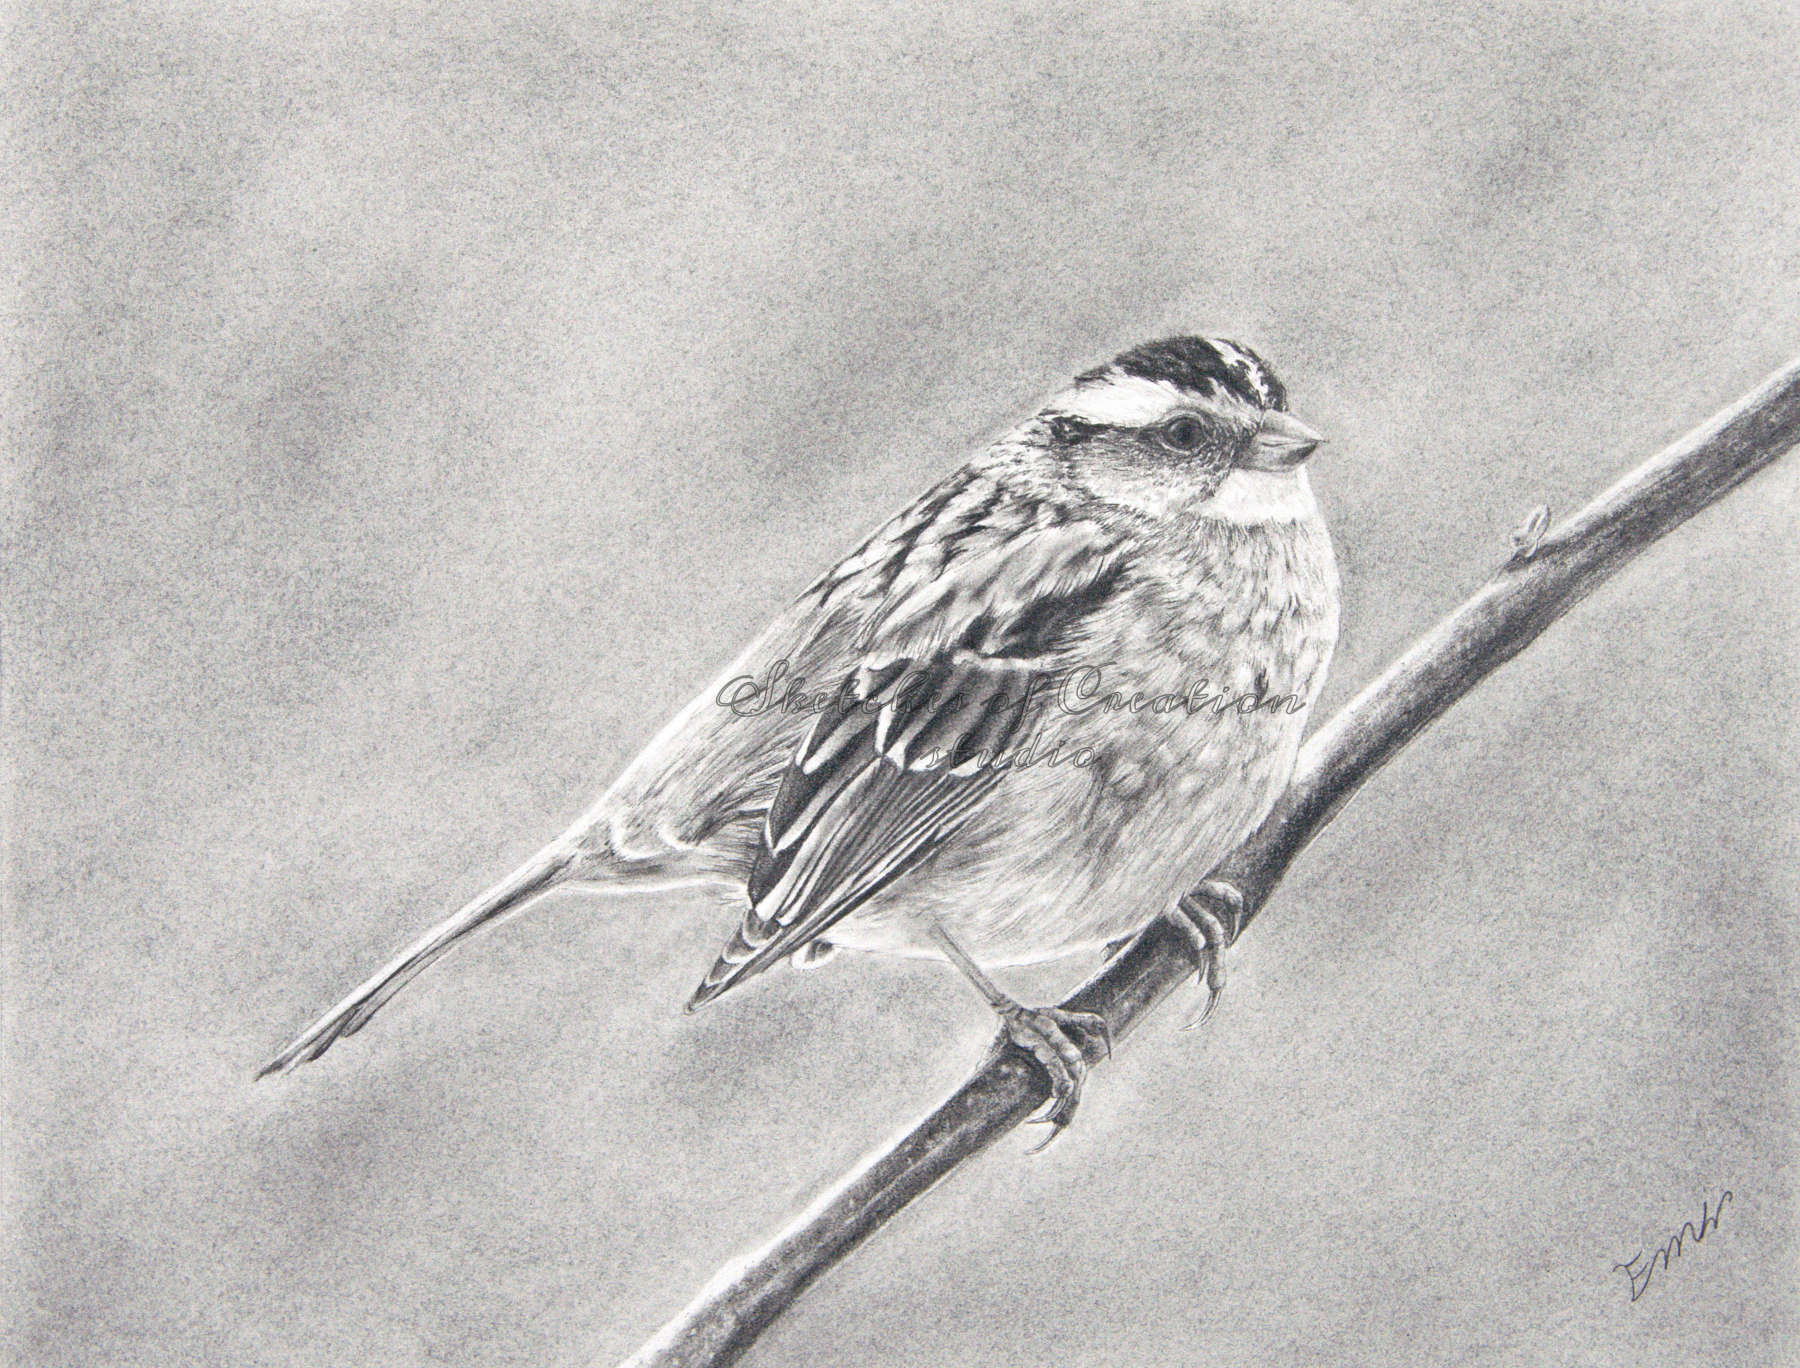 'Sparrow' a drawing of a white-throated sparrow. 8x10 inches. Completed April 2020